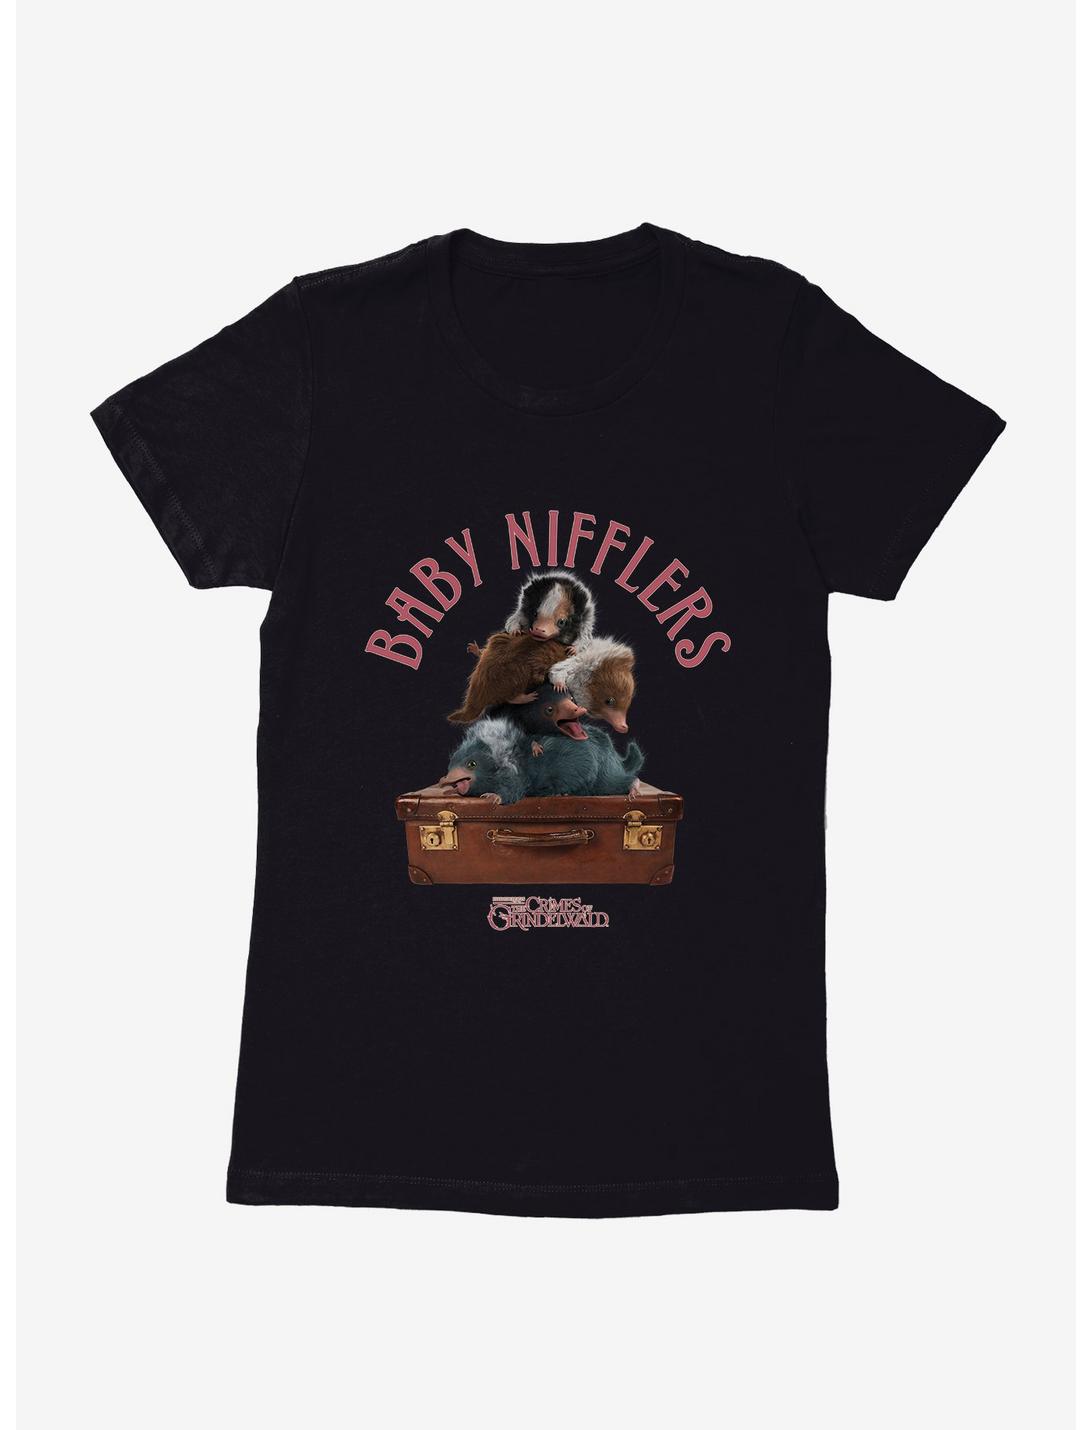 Fantastic Beasts: The Crimes Of Grindelwald Baby Nifflers Womens T-Shirt, , hi-res